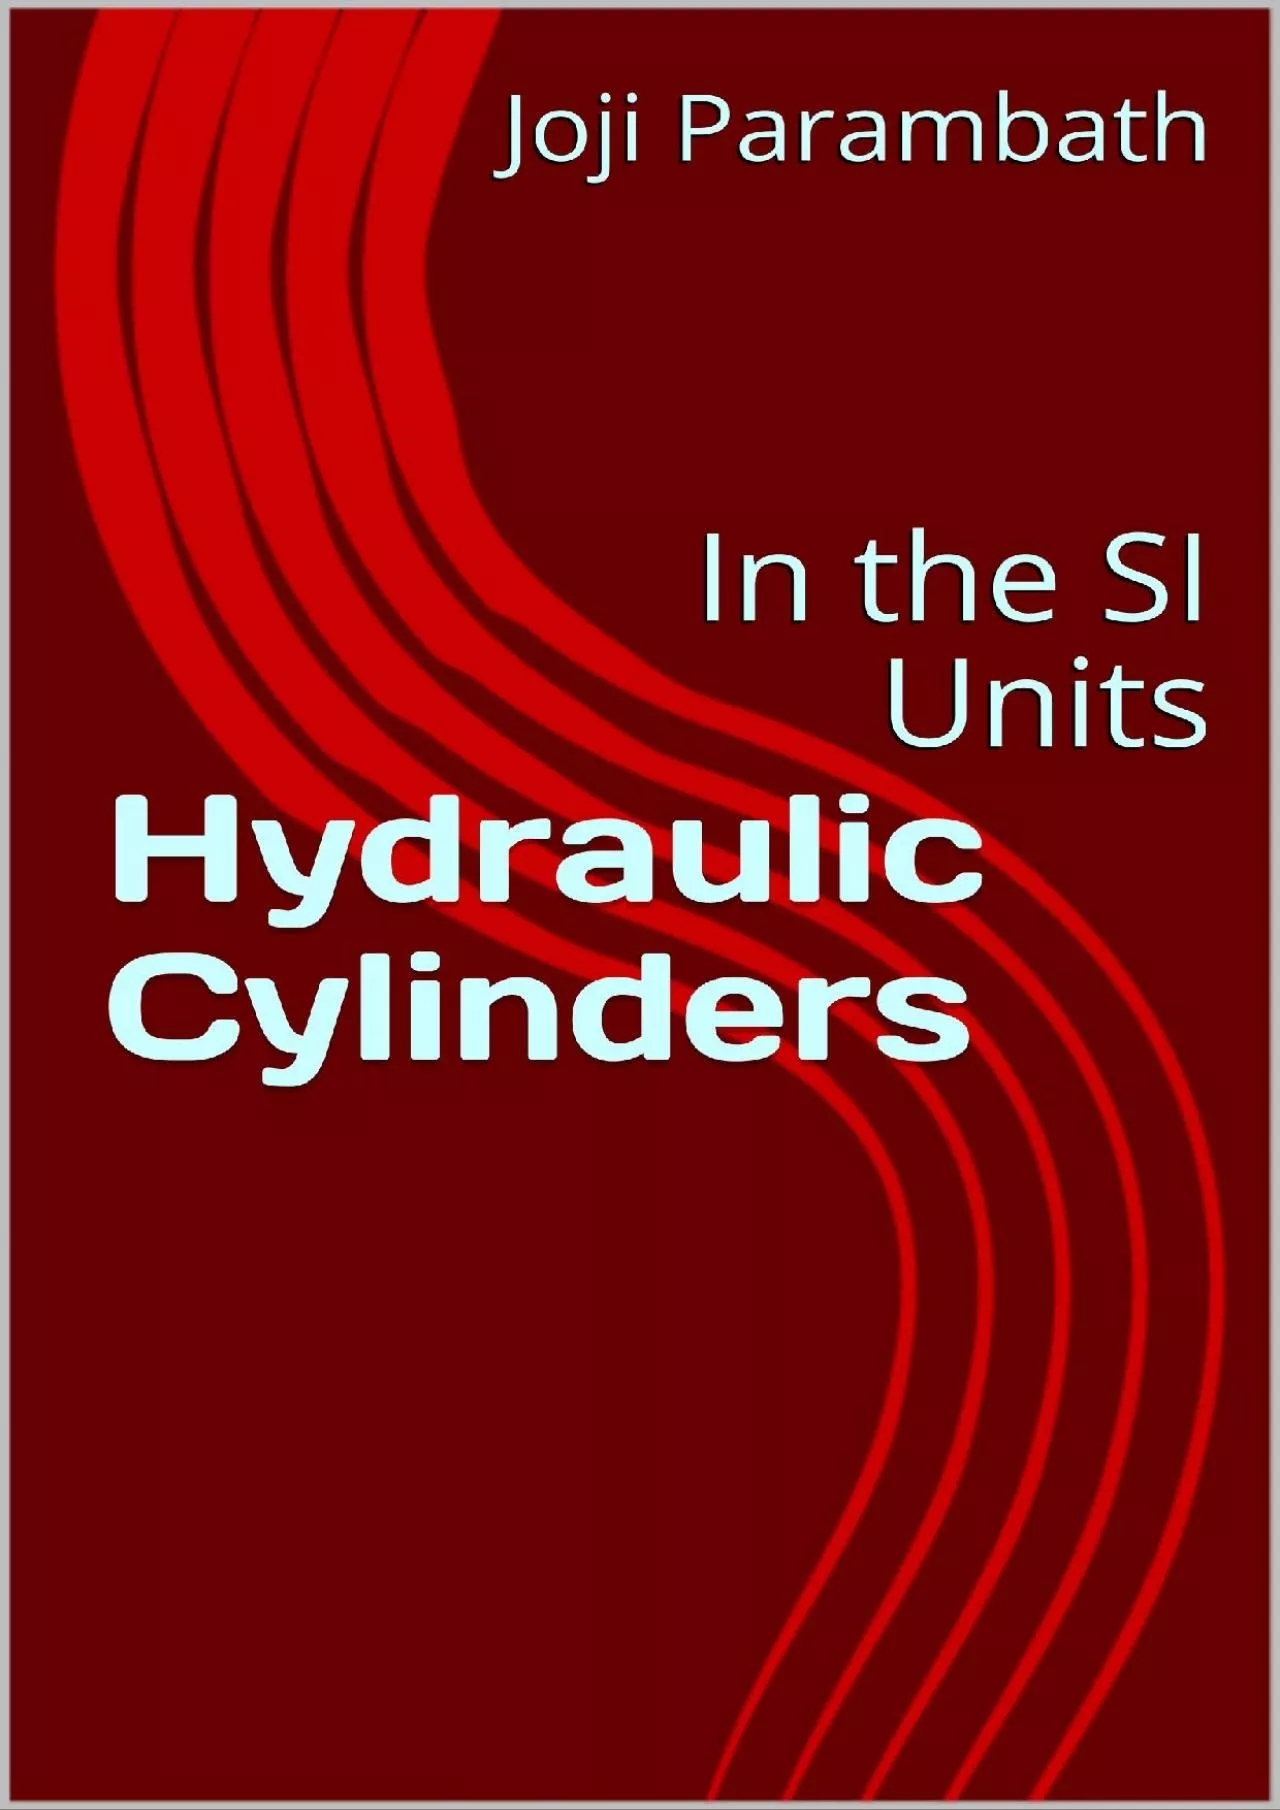 [DOWNLOAD] Hydraulic Cylinders: In the SI Units Industrial Hydraulic Book Series in the